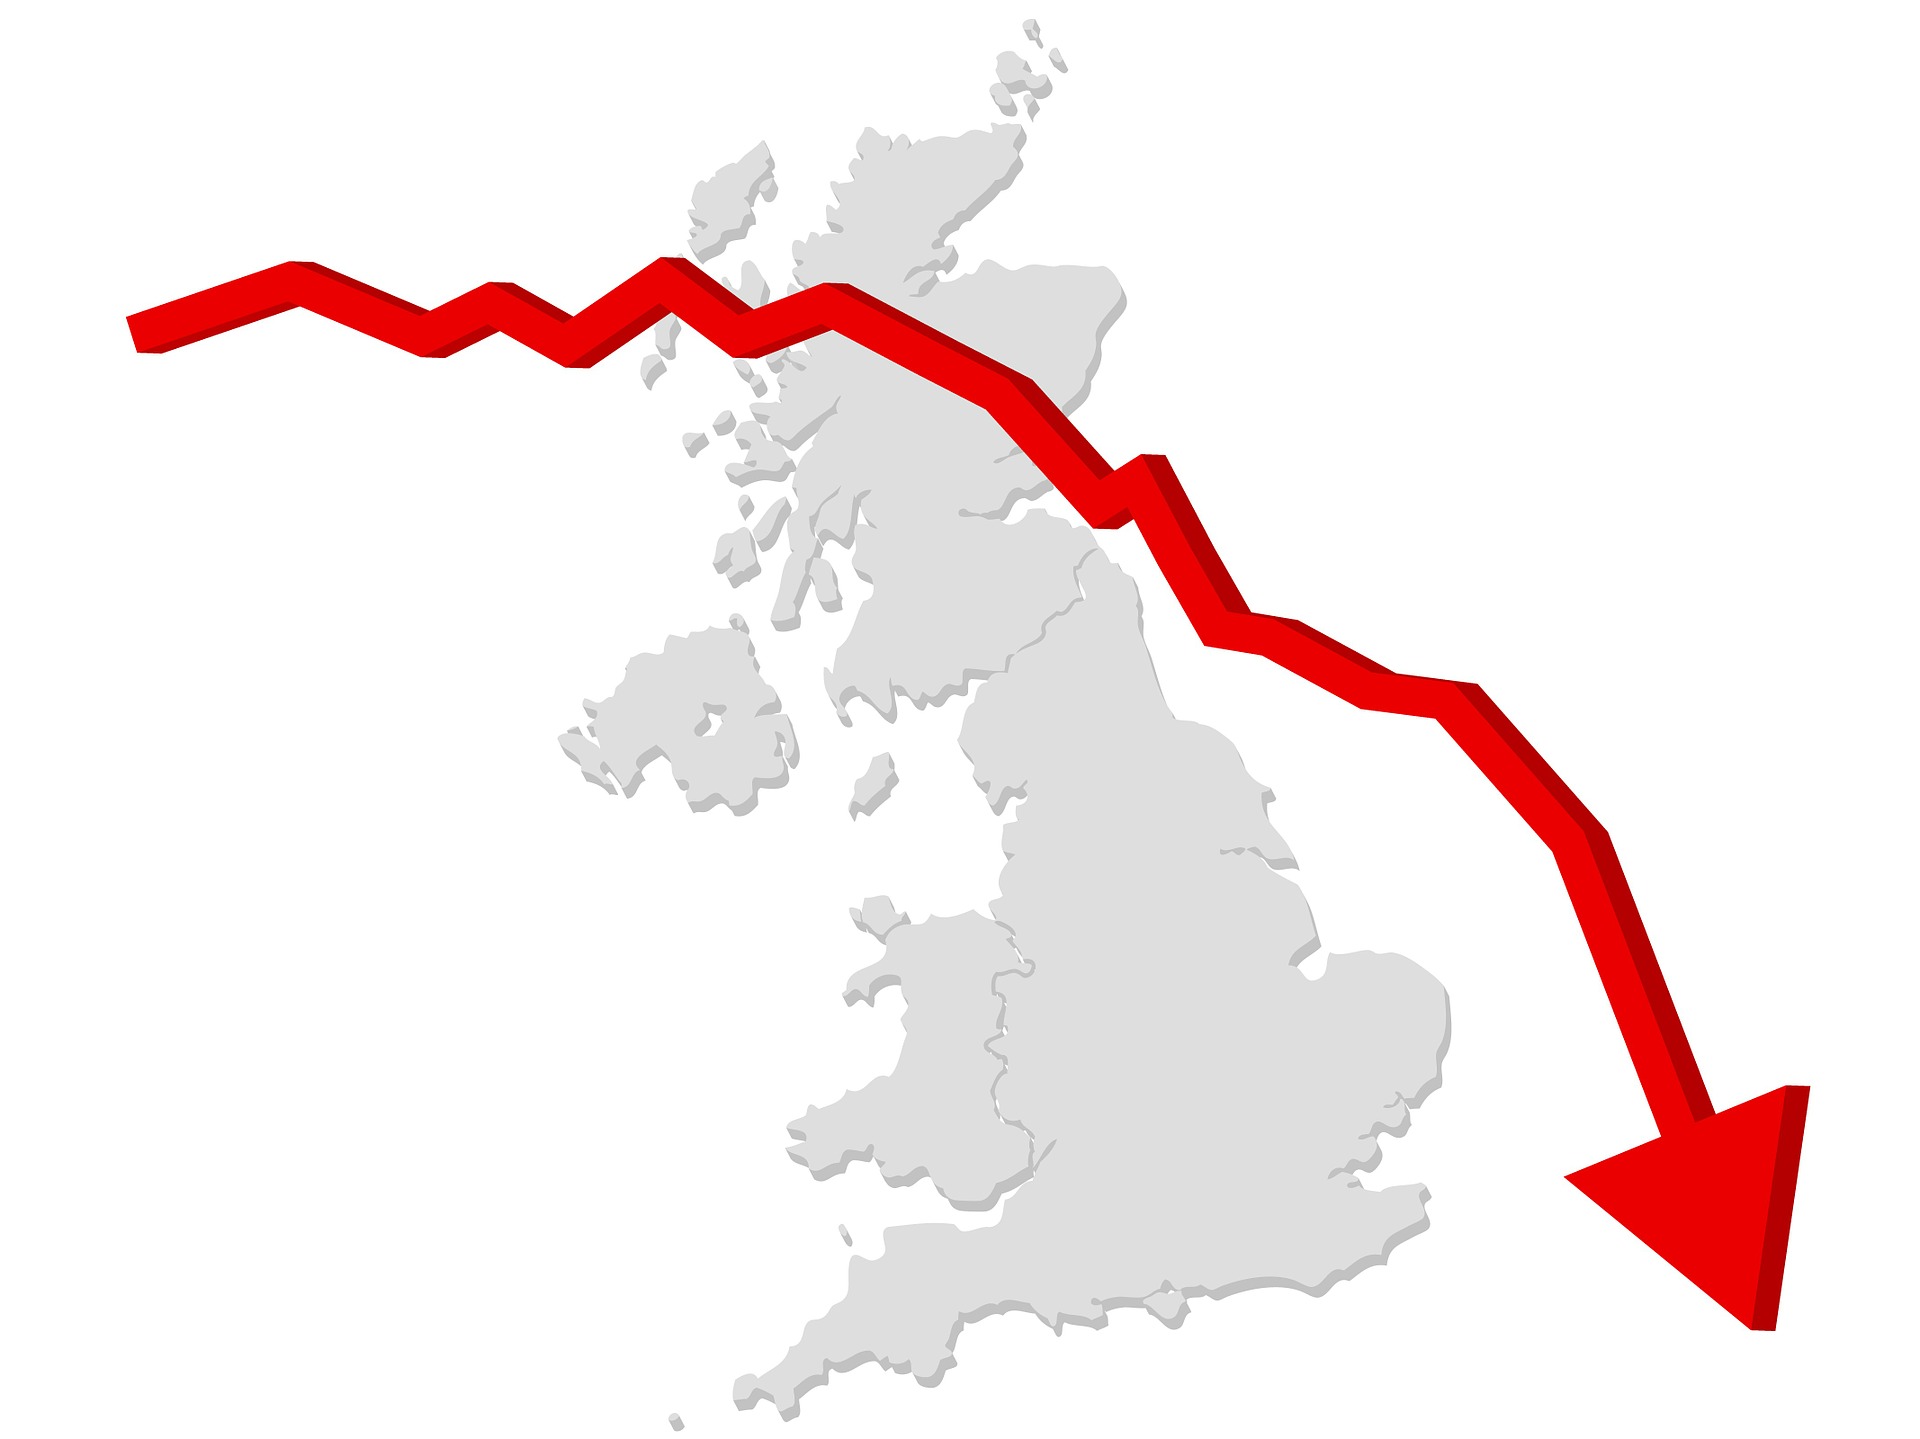 uk-house-prices-fall-at-fastest-pace-in-more-than-a-decade-–-industry-reaction